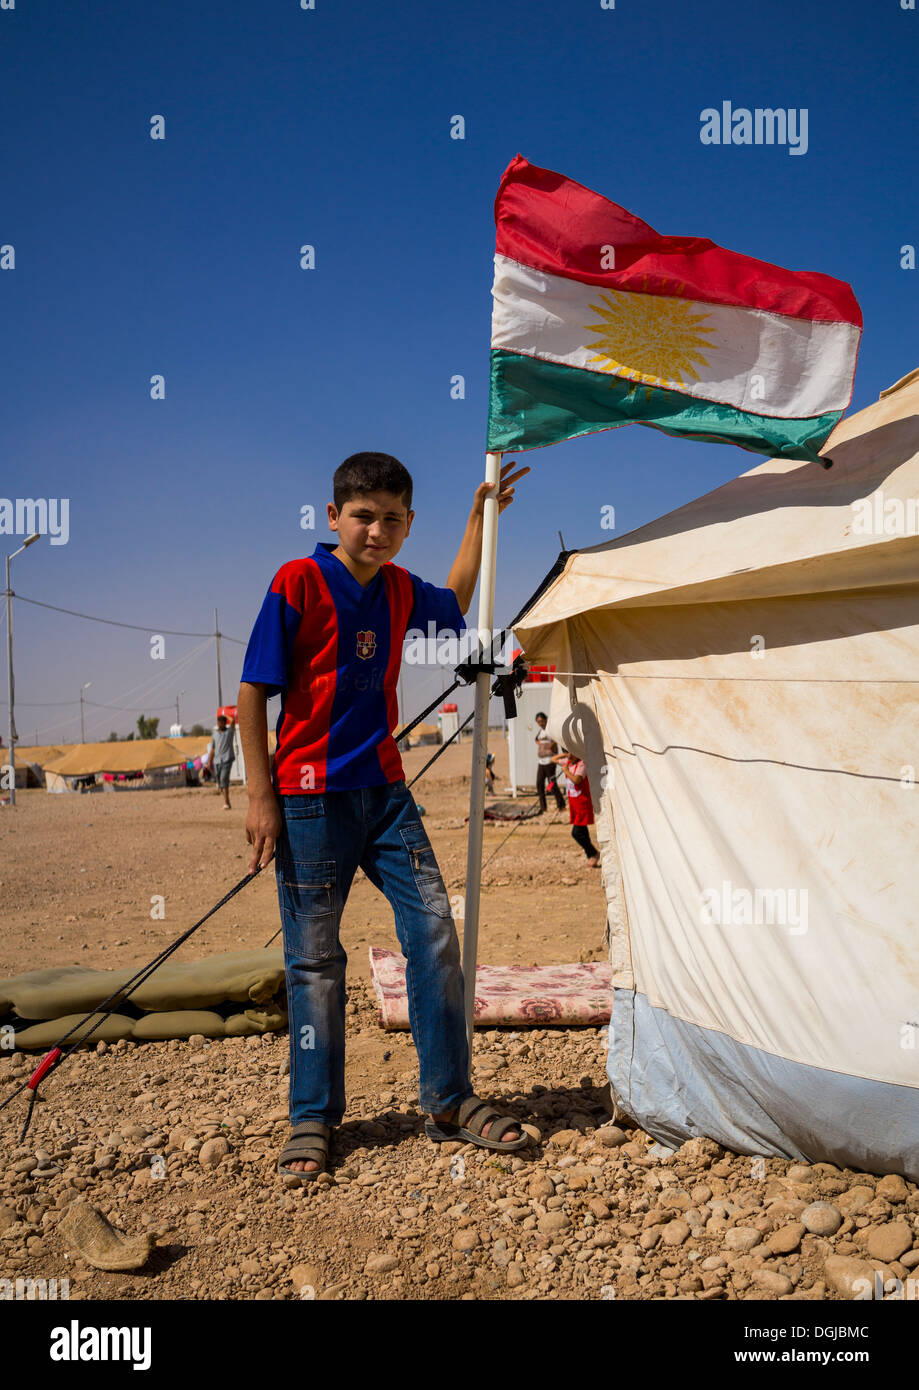 Syrian Refugee Child With A Barcelona Shirt In Front Of His Tent, Erbil, Kurdistan, Iraq Stock Photo